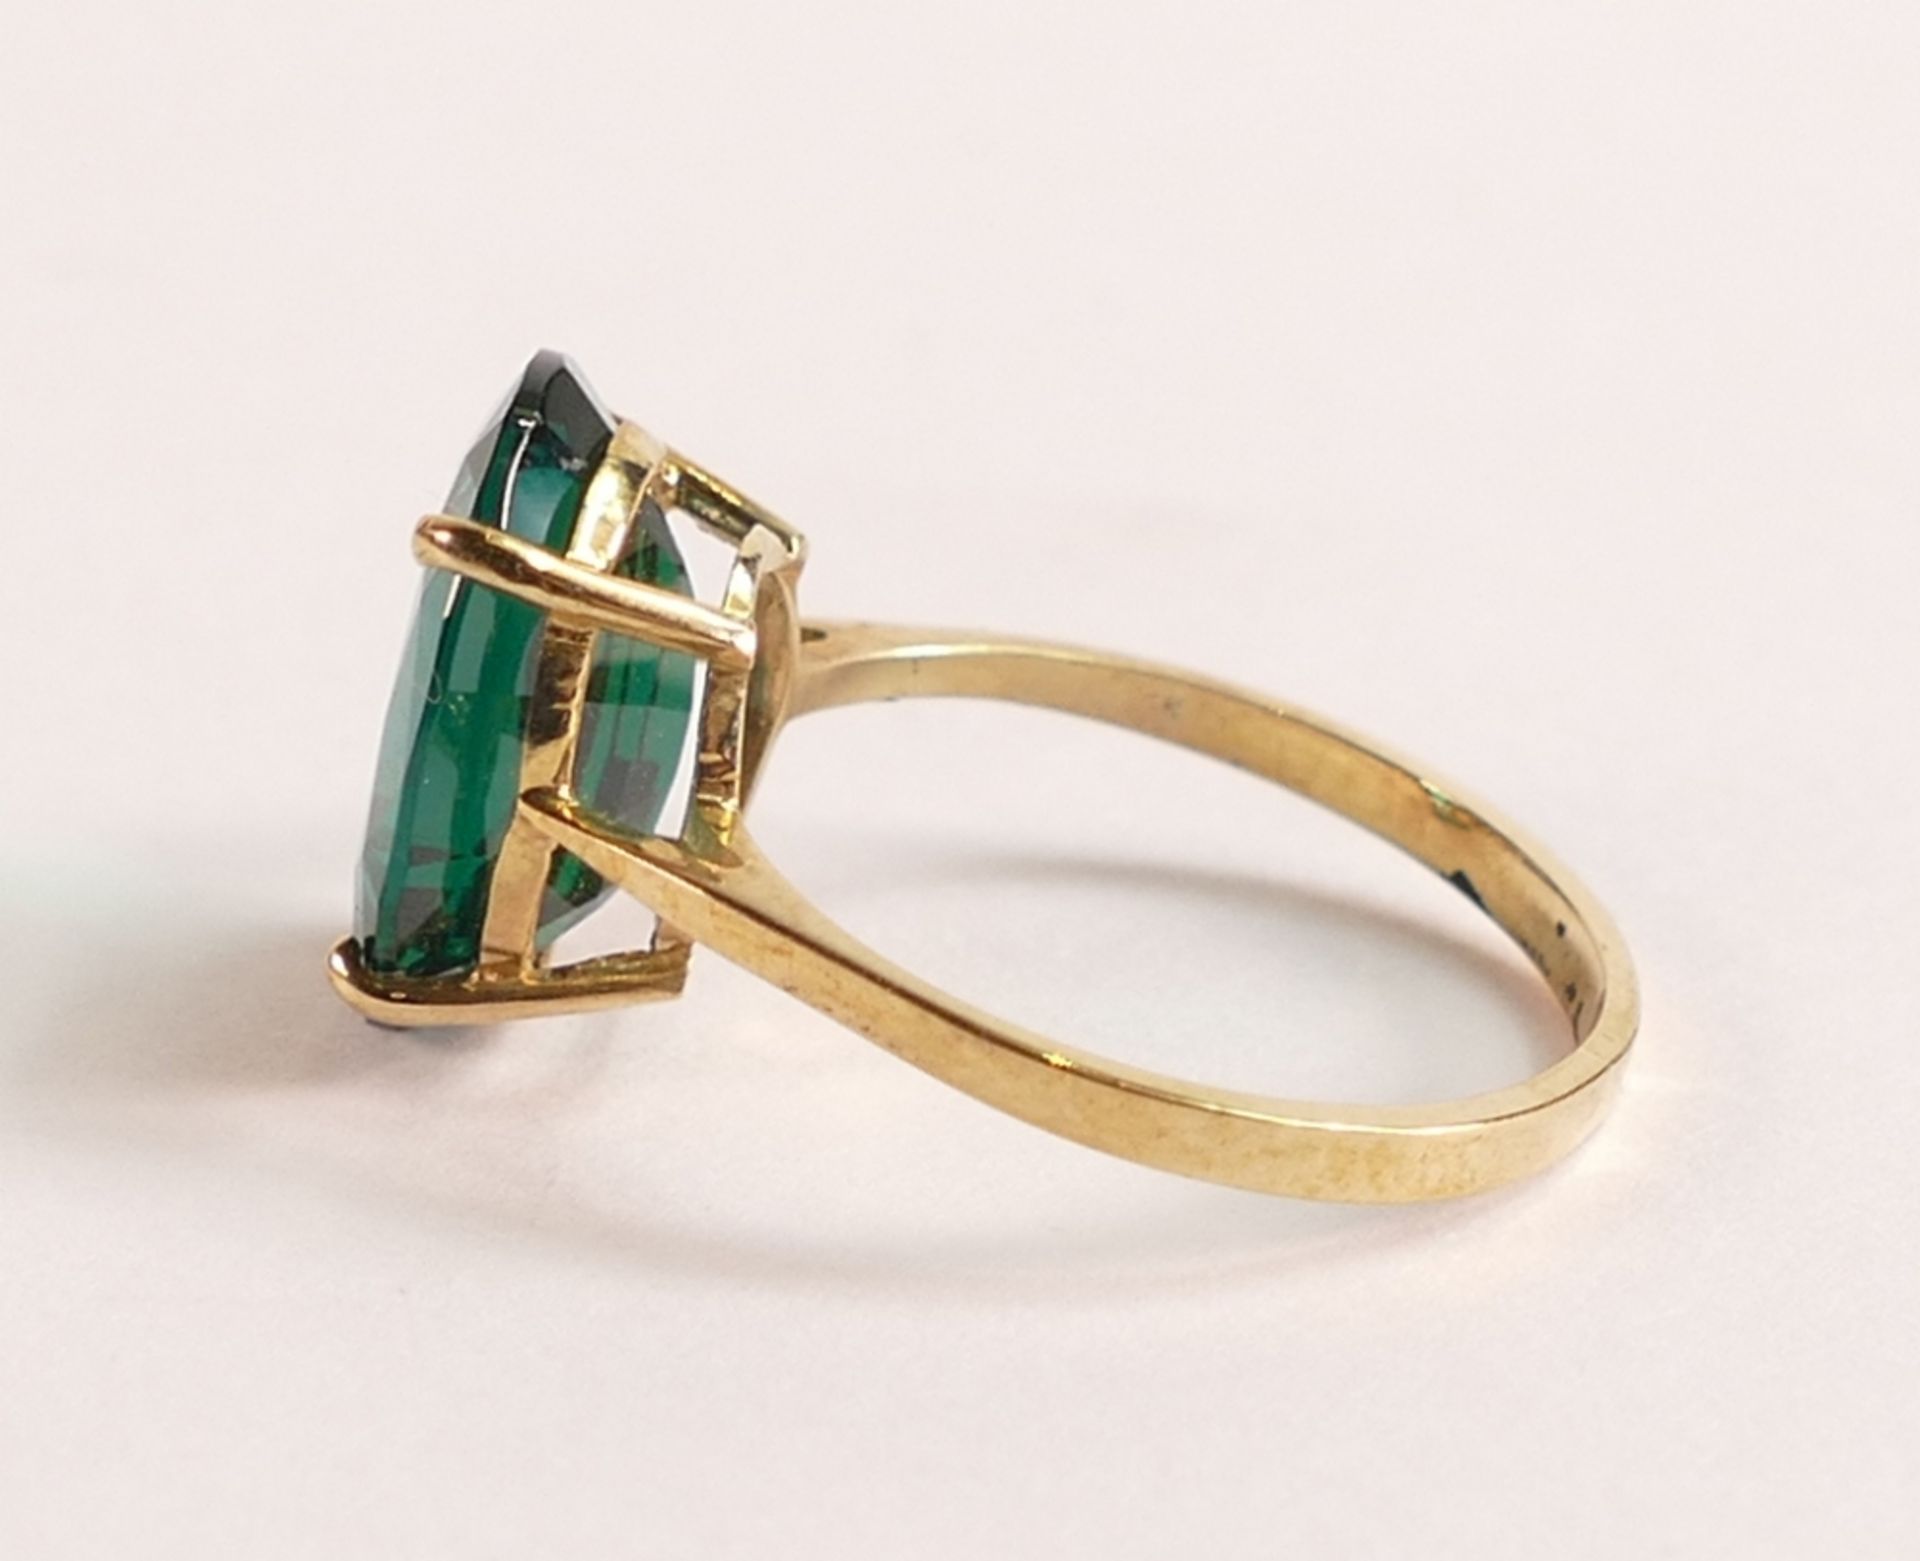 26 Lab Grown Emerald Valiant Ring 4.5 ct in 375 9ct Gold - This exceptional ring needs little - Image 2 of 3